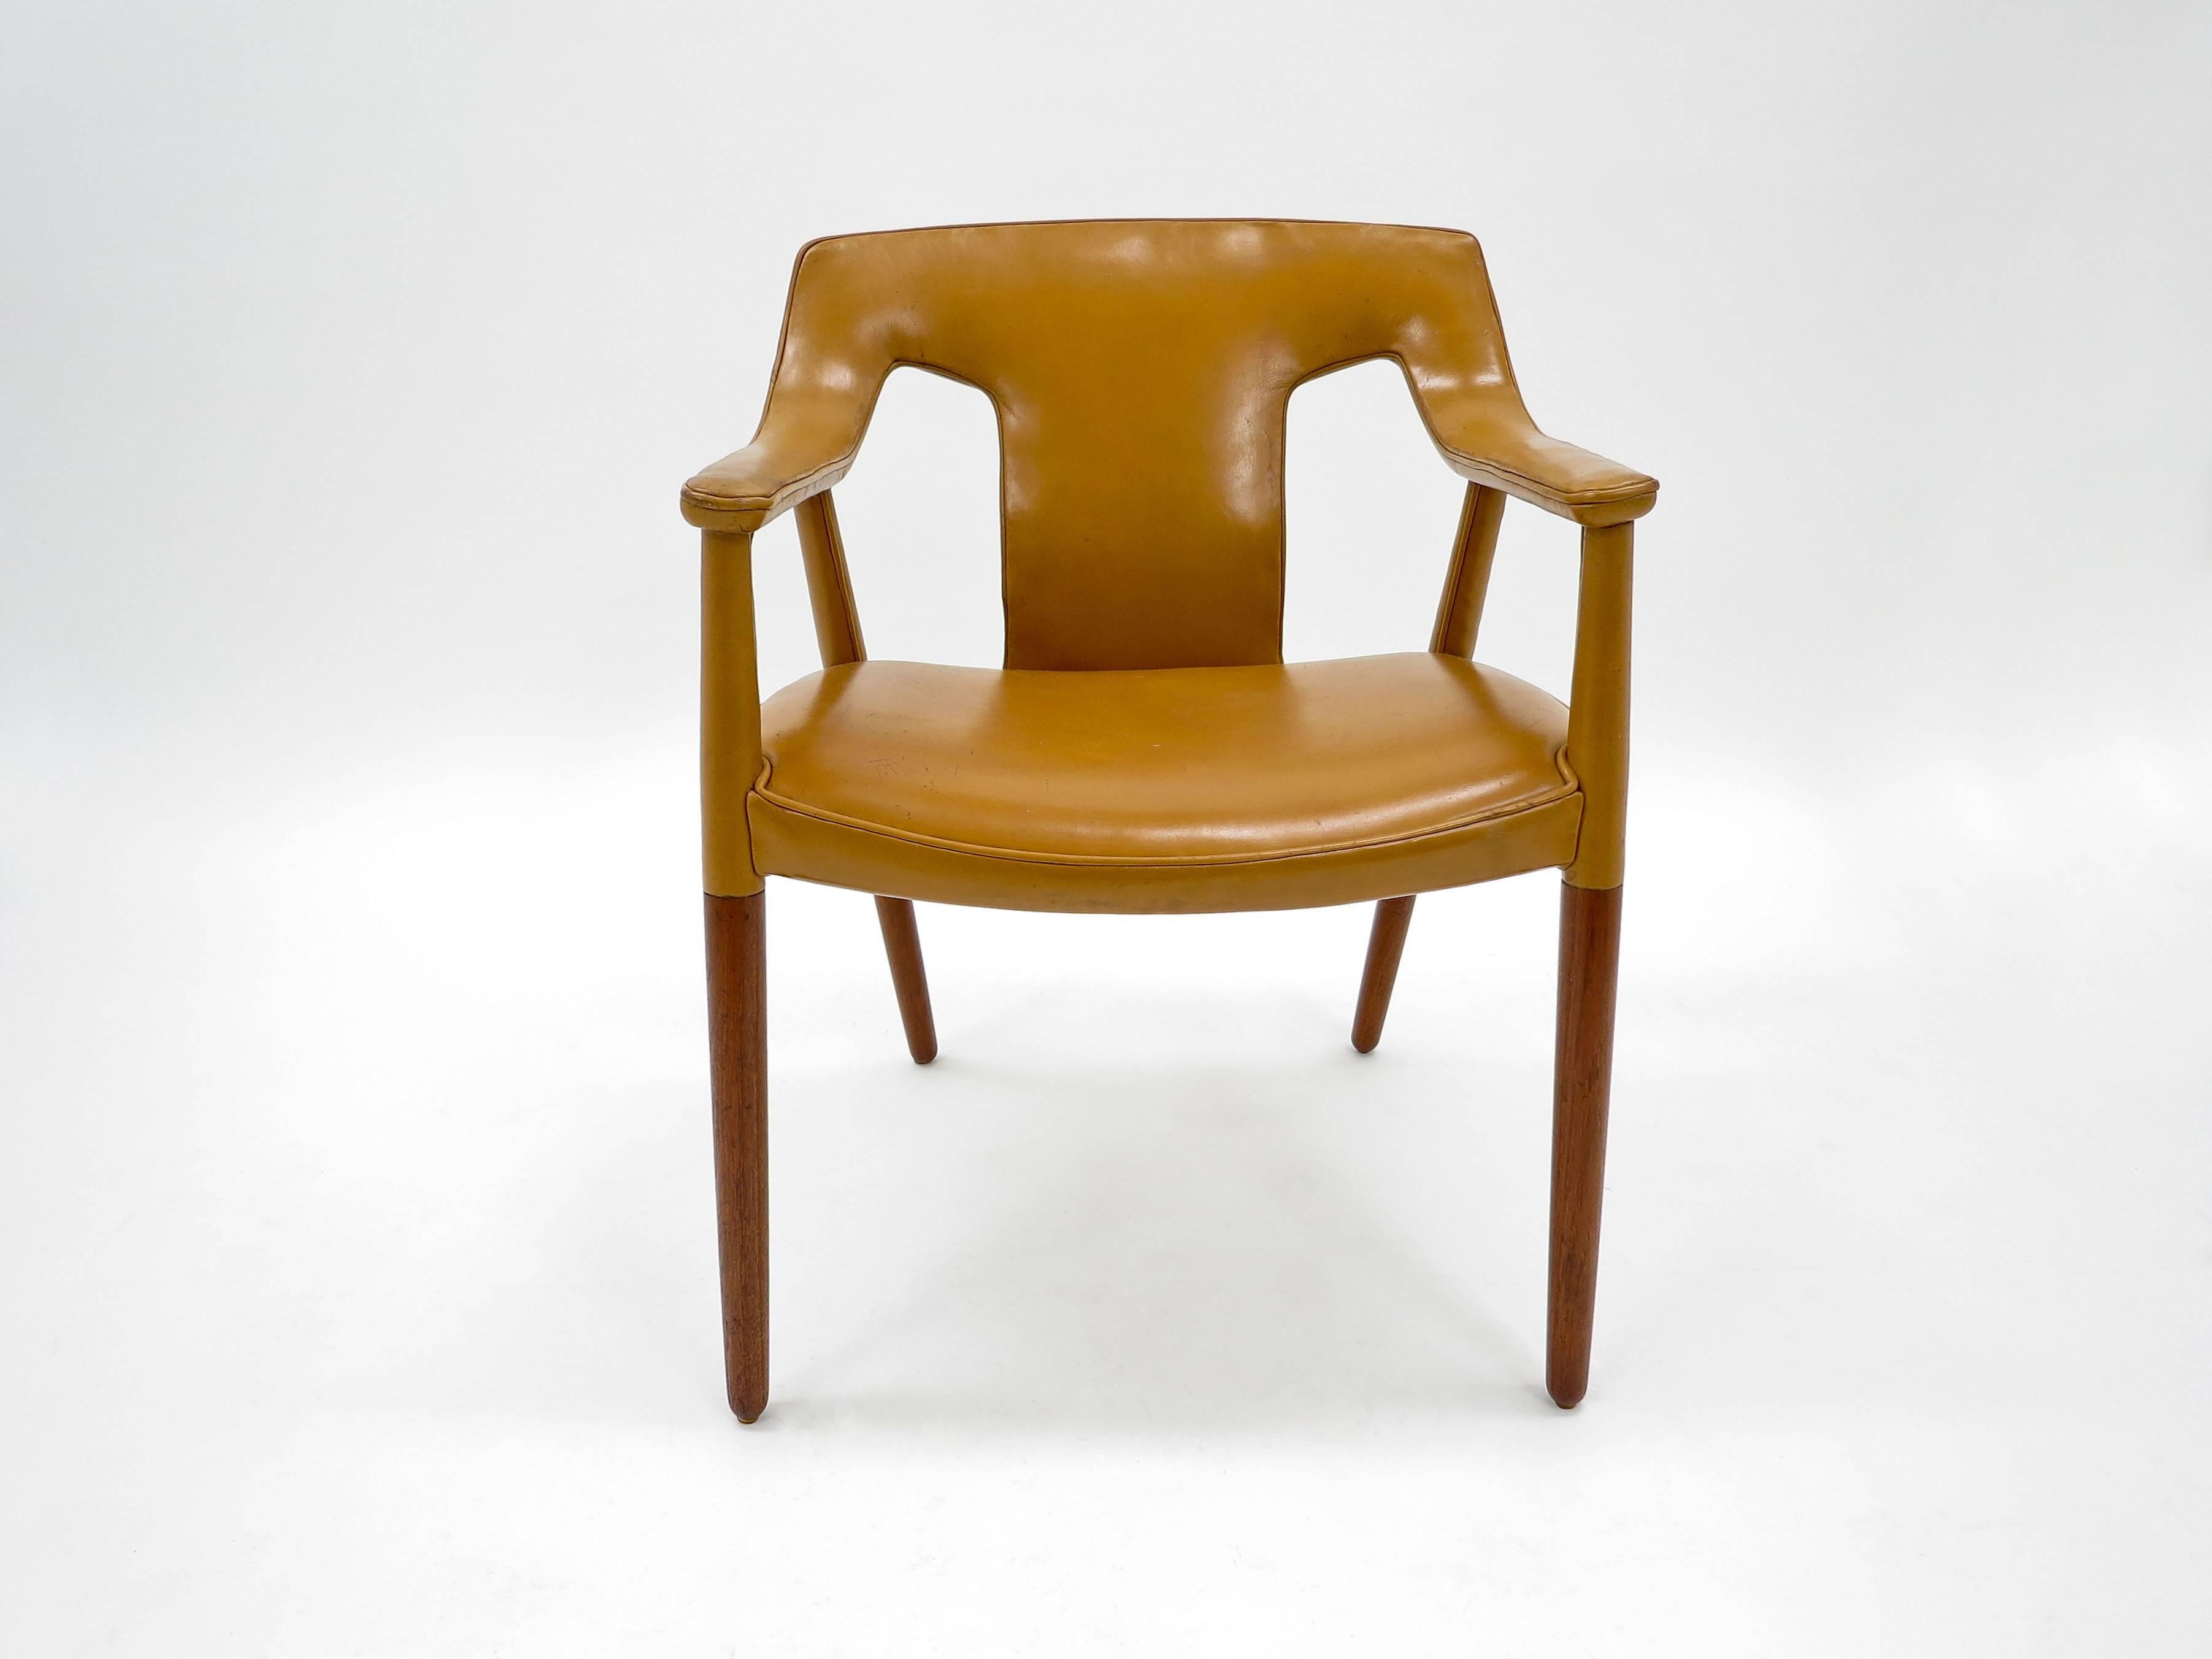 Bender Madsen and Larsen Armchair Leather and Teak, Danish, 1950s For Sale 4